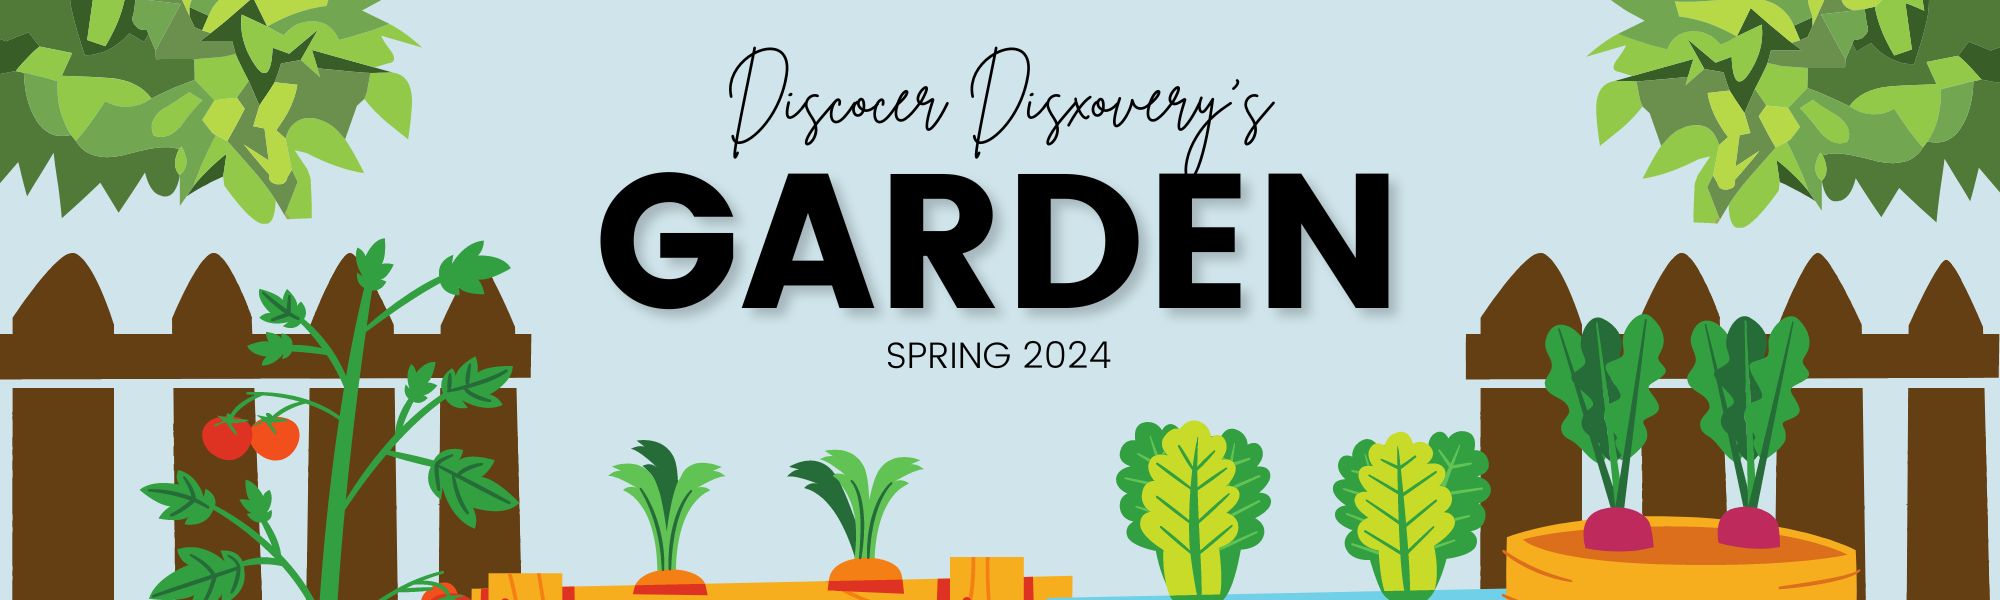 Banner with garden gate and vegetables with text "Discover Discovery's Garden Spring 2024"